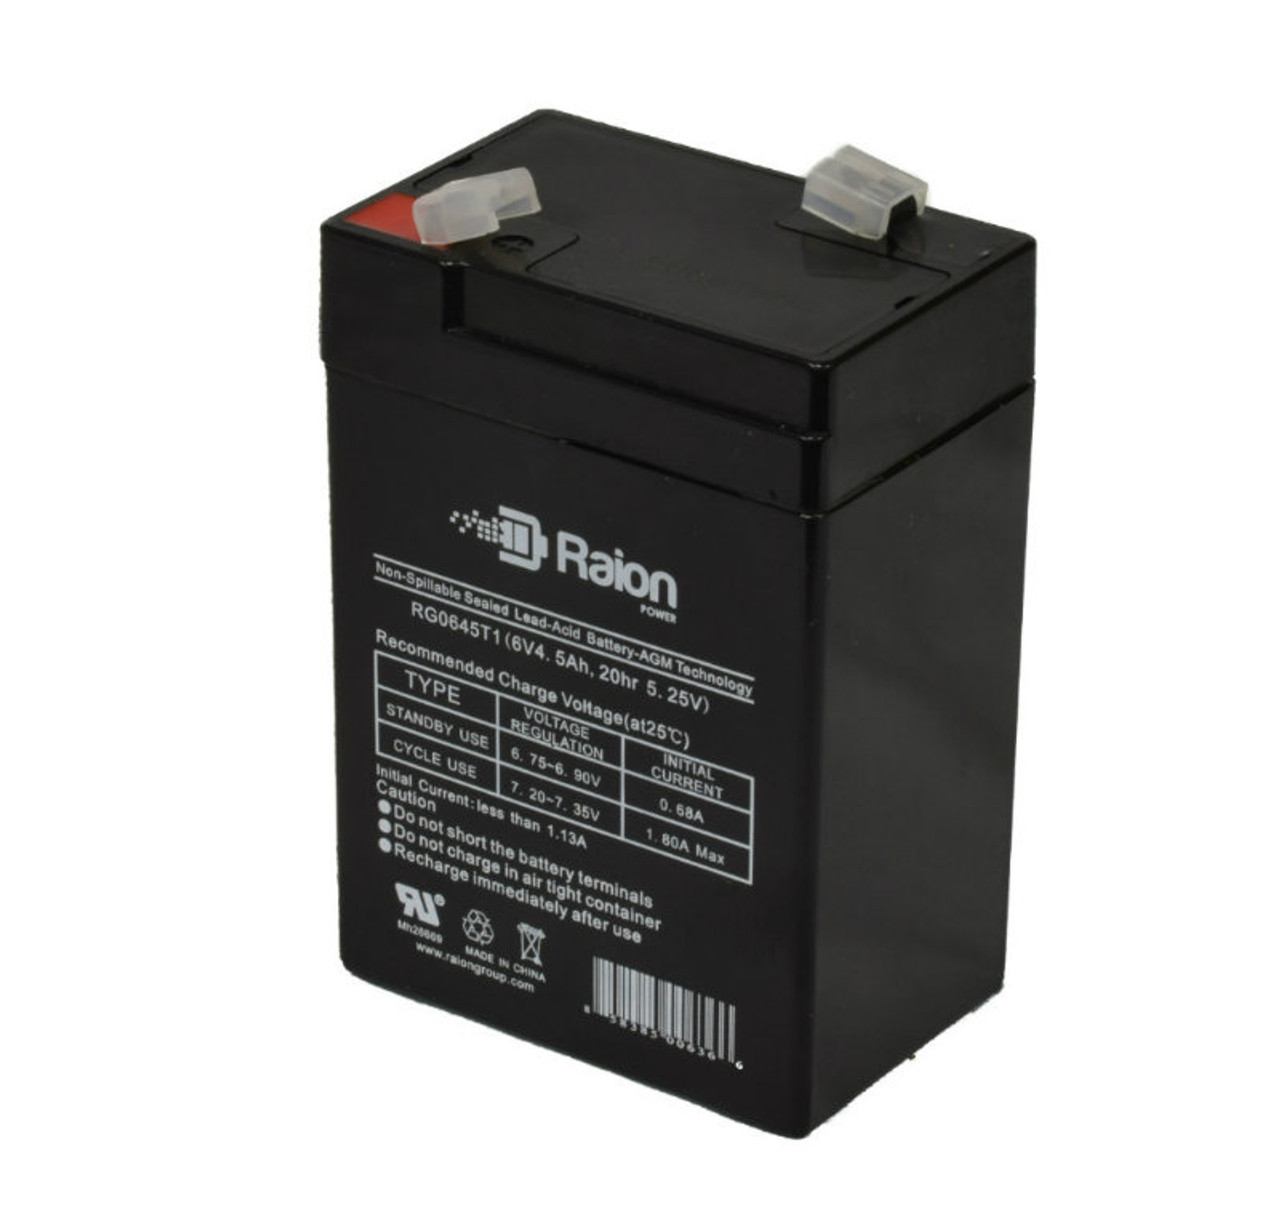 Raion Power RG0645T1 Replacement Battery for Gallagher S16